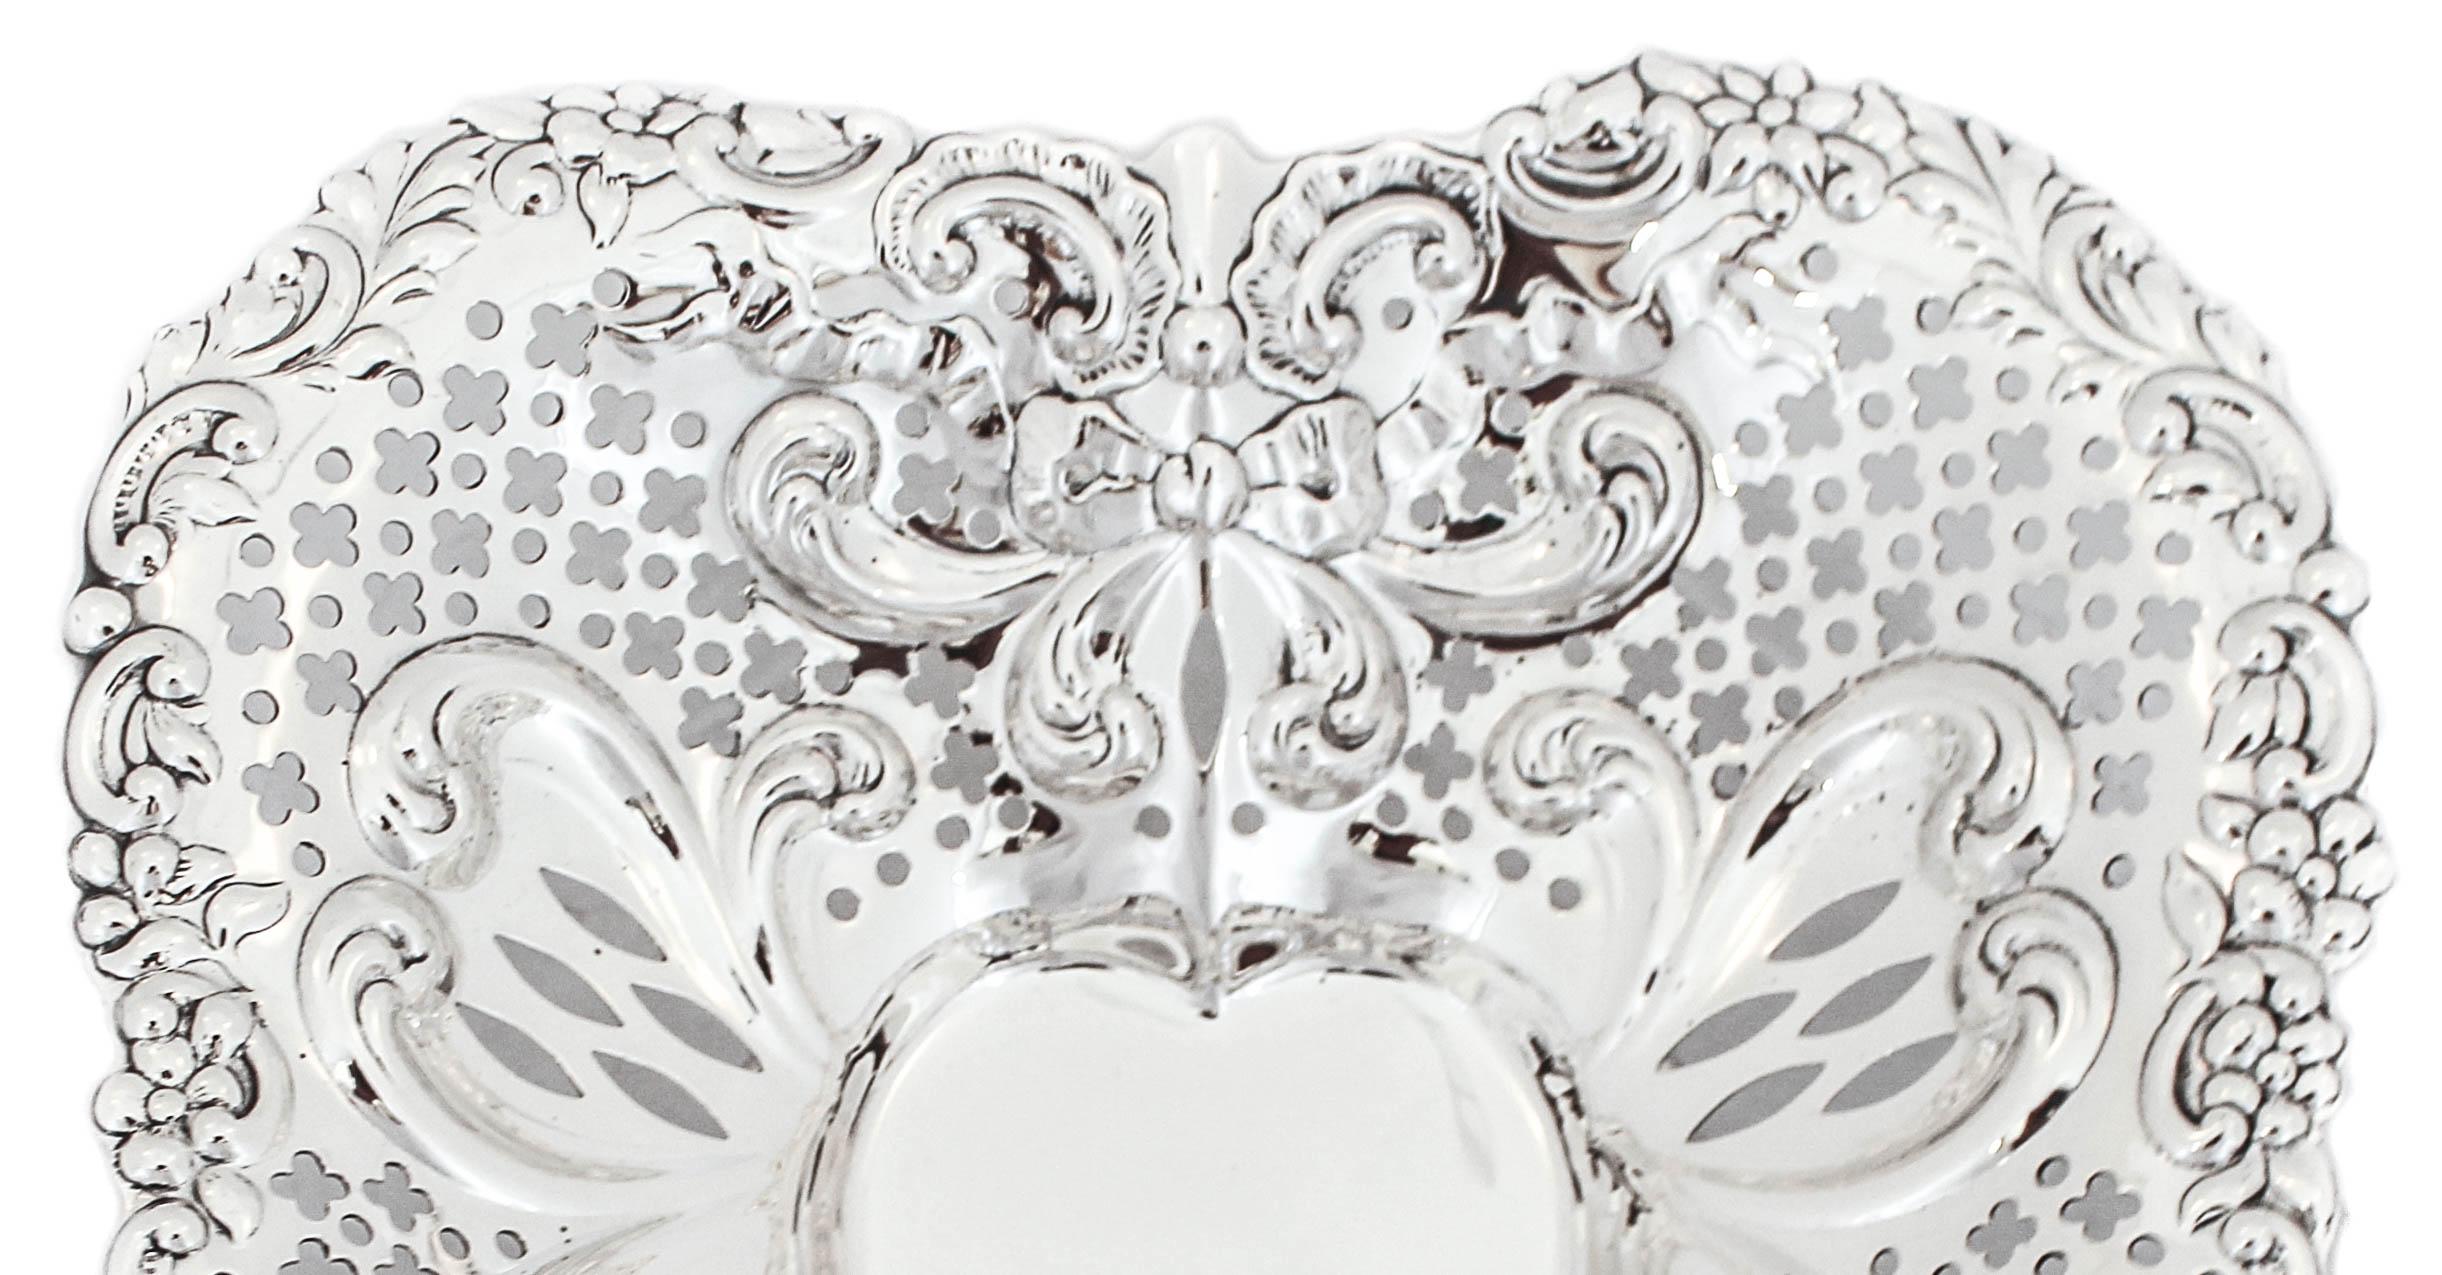 Love will be in the air with this gorgeous sterling silver heart dish by Gorham Silversmiths. It has a reticulated pattern all around the sides with a fluted rim. Imagine this filled with chocolates resting on your coffee table!